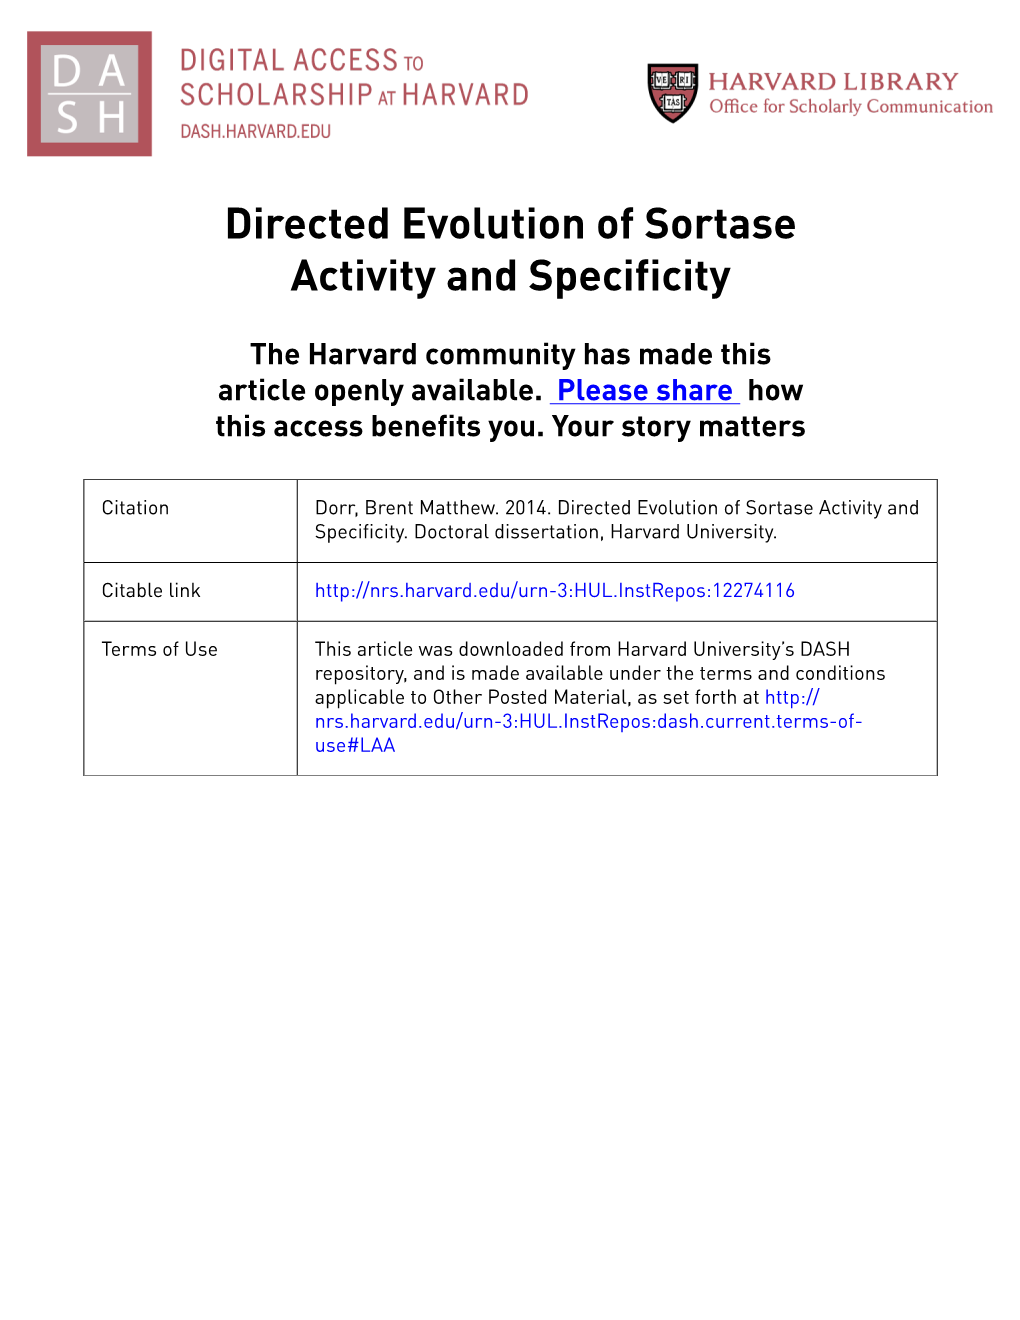 Directed Evolution of Sortase Activity and Specificity